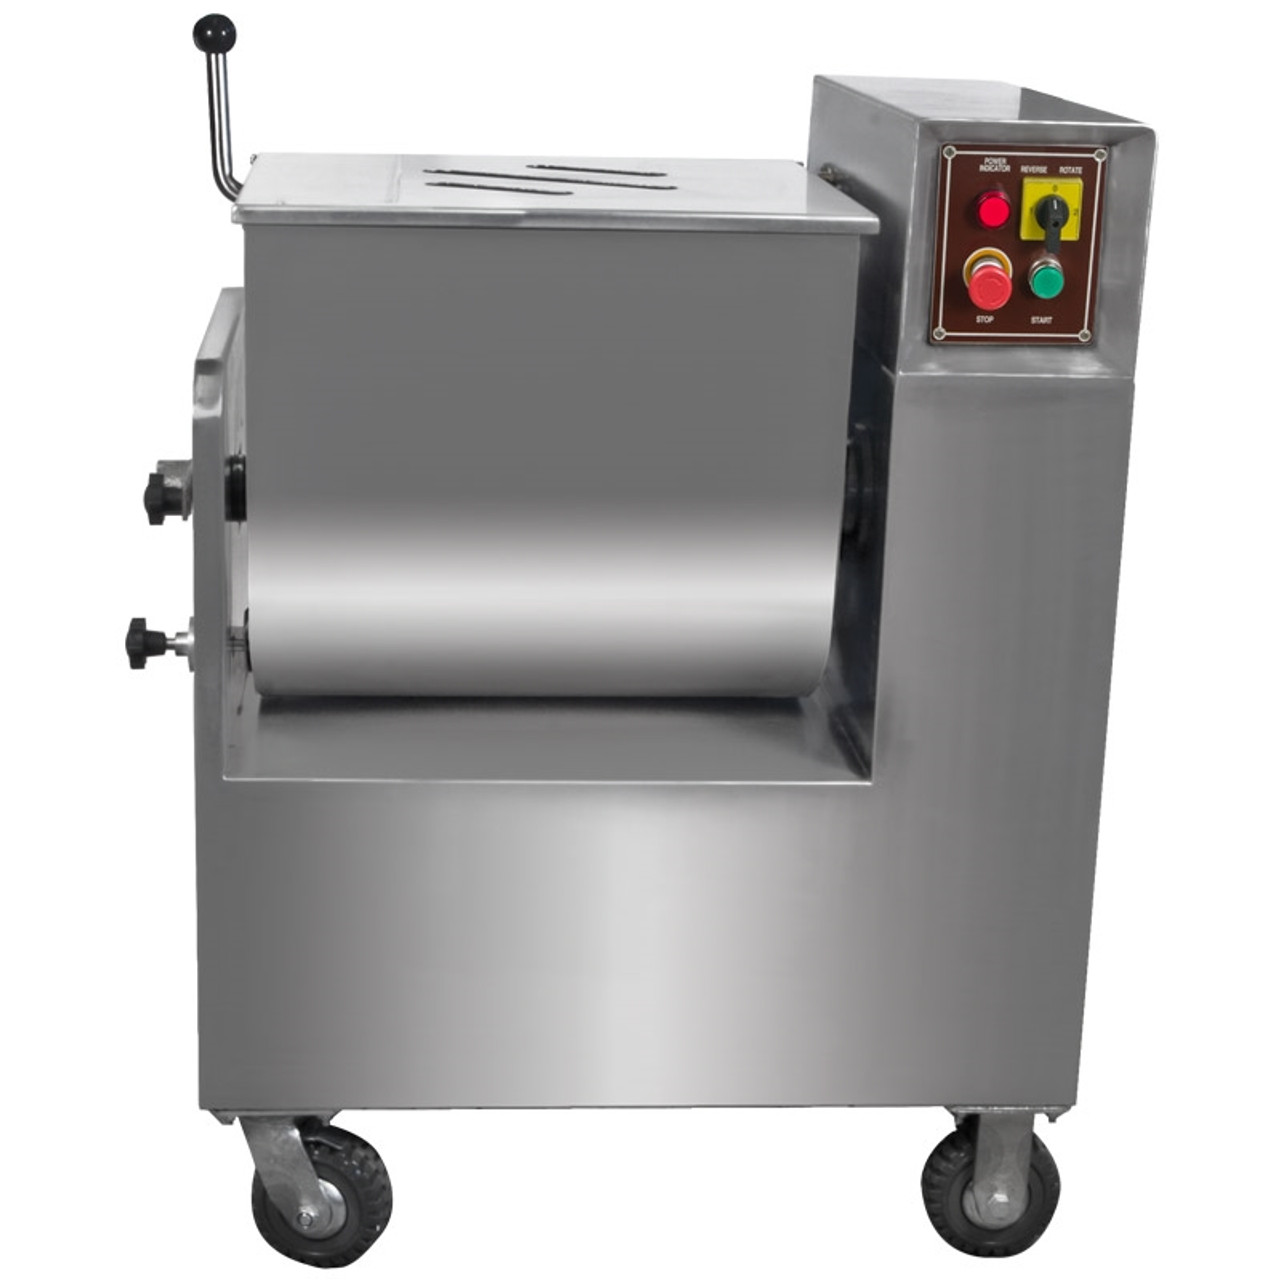 https://cdn11.bigcommerce.com/s-3n1nnt5qyw/images/stencil/1280x1280/products/2804/3377/sausage-maker-220-lb-capacity-commercial-stainless-steel-meat-mixer-model-44146-19__70736.1629739715.jpg?c=1